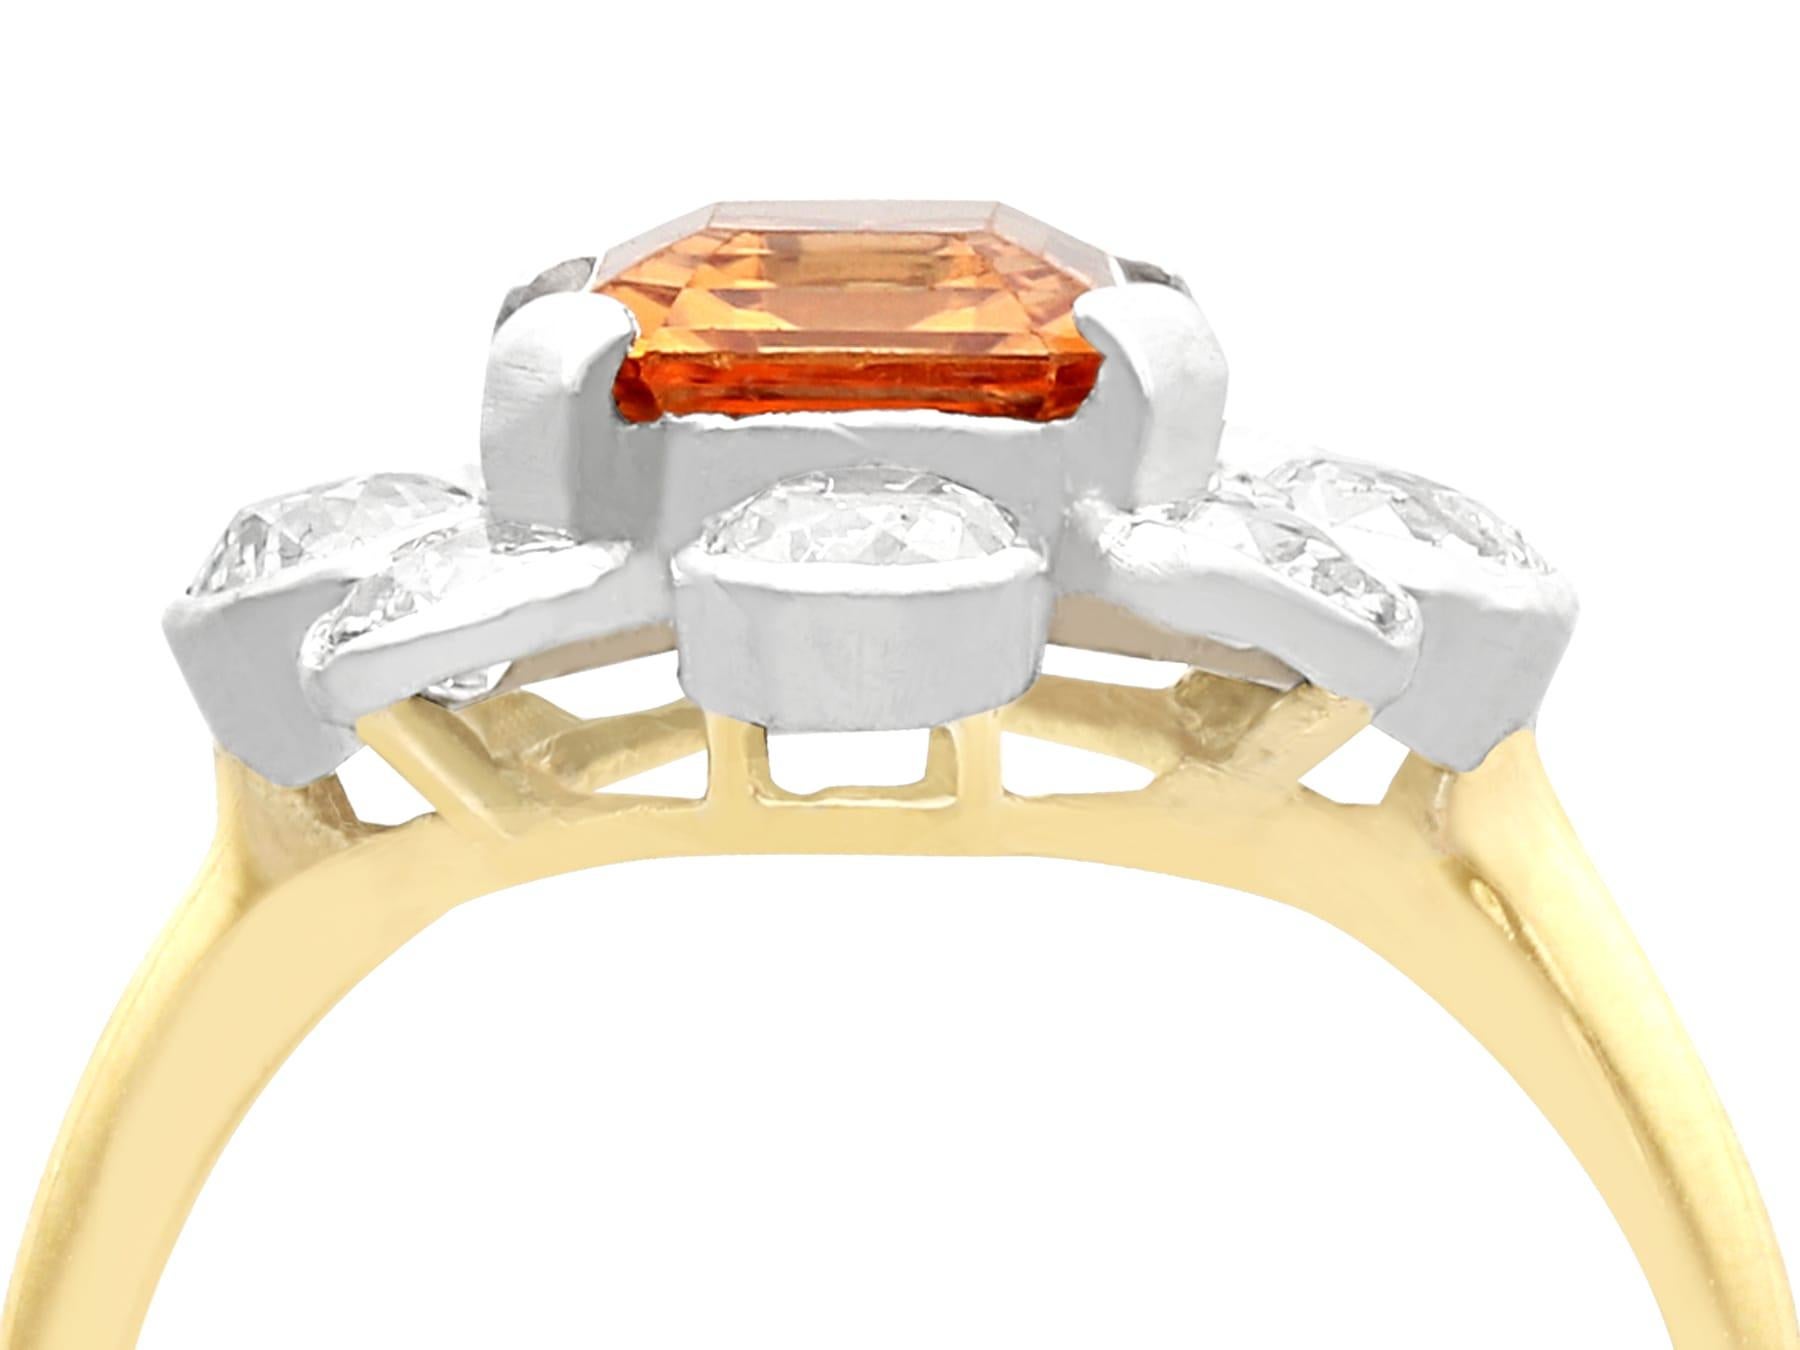 An impressive antique 2.38 carat golden topaz and 1.88 carat diamond, 18 karat gold dress ring; part of our diverse antique jewelry and estate jewelry collections.

This fine and impressive antique golden emerald cut Topaz and diamond ring has been